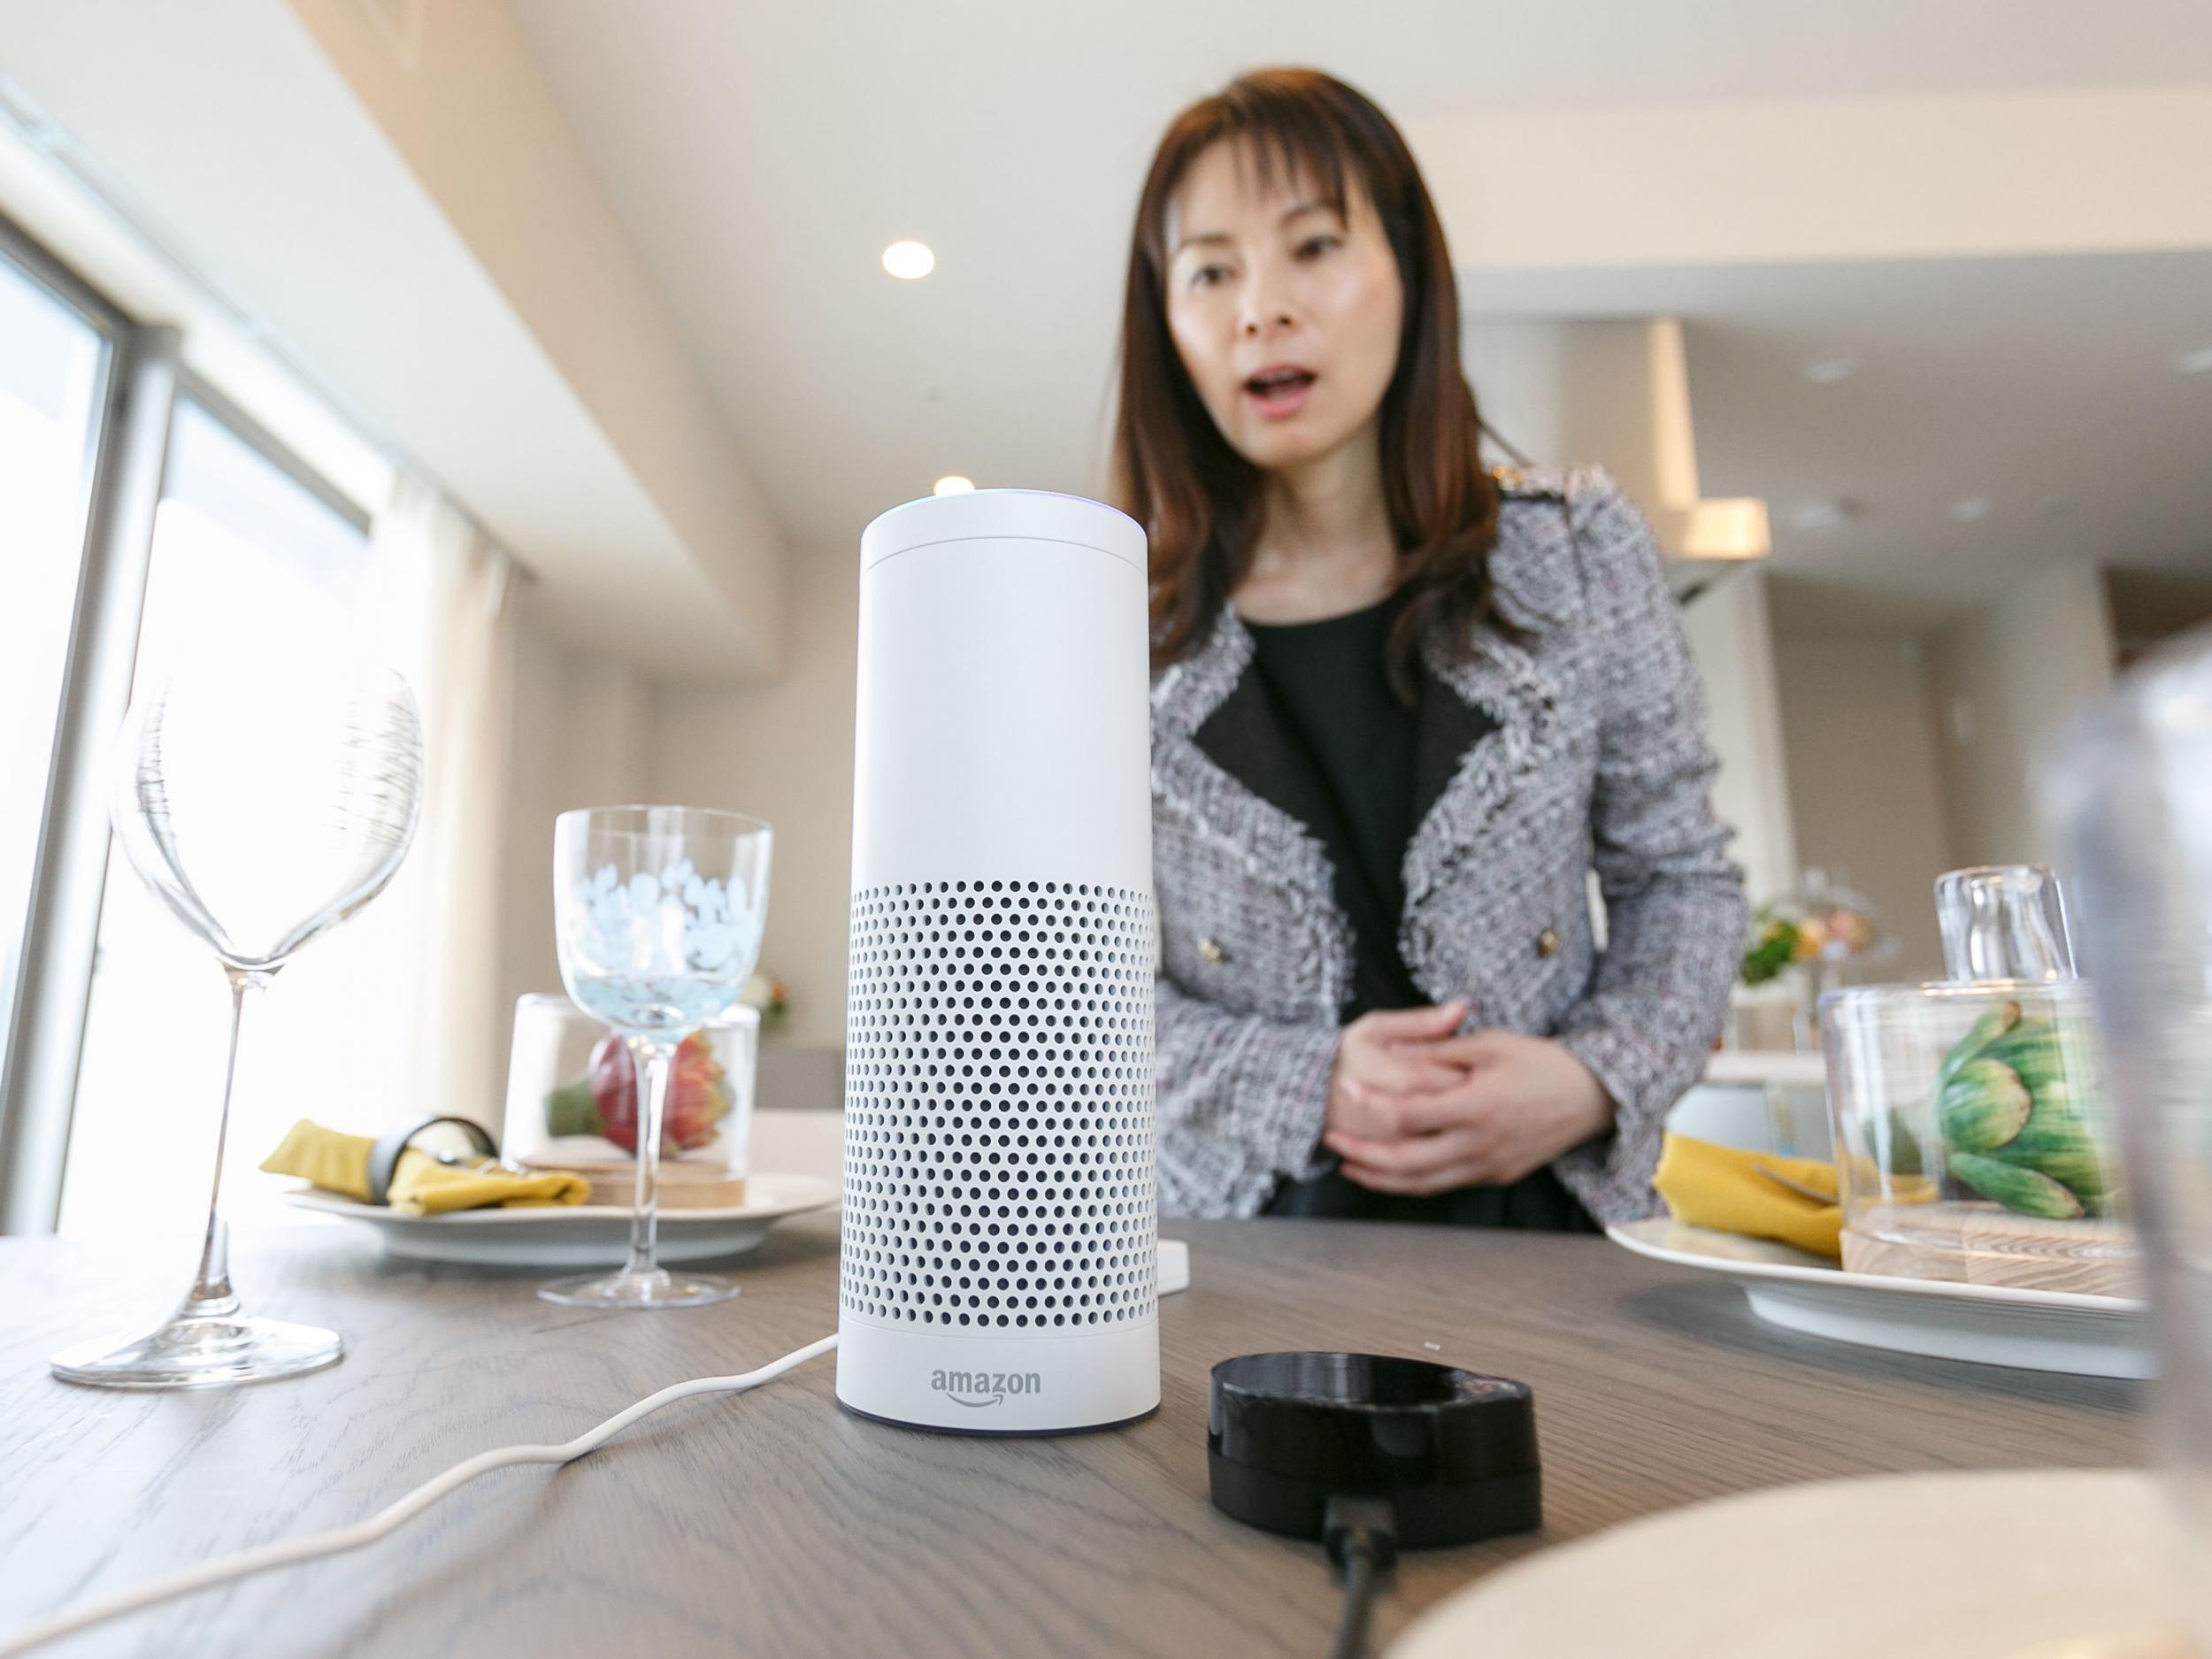 The Amazon Echo makes use of Amazon's artificial intelligence assistant app called Alexa to help around the house